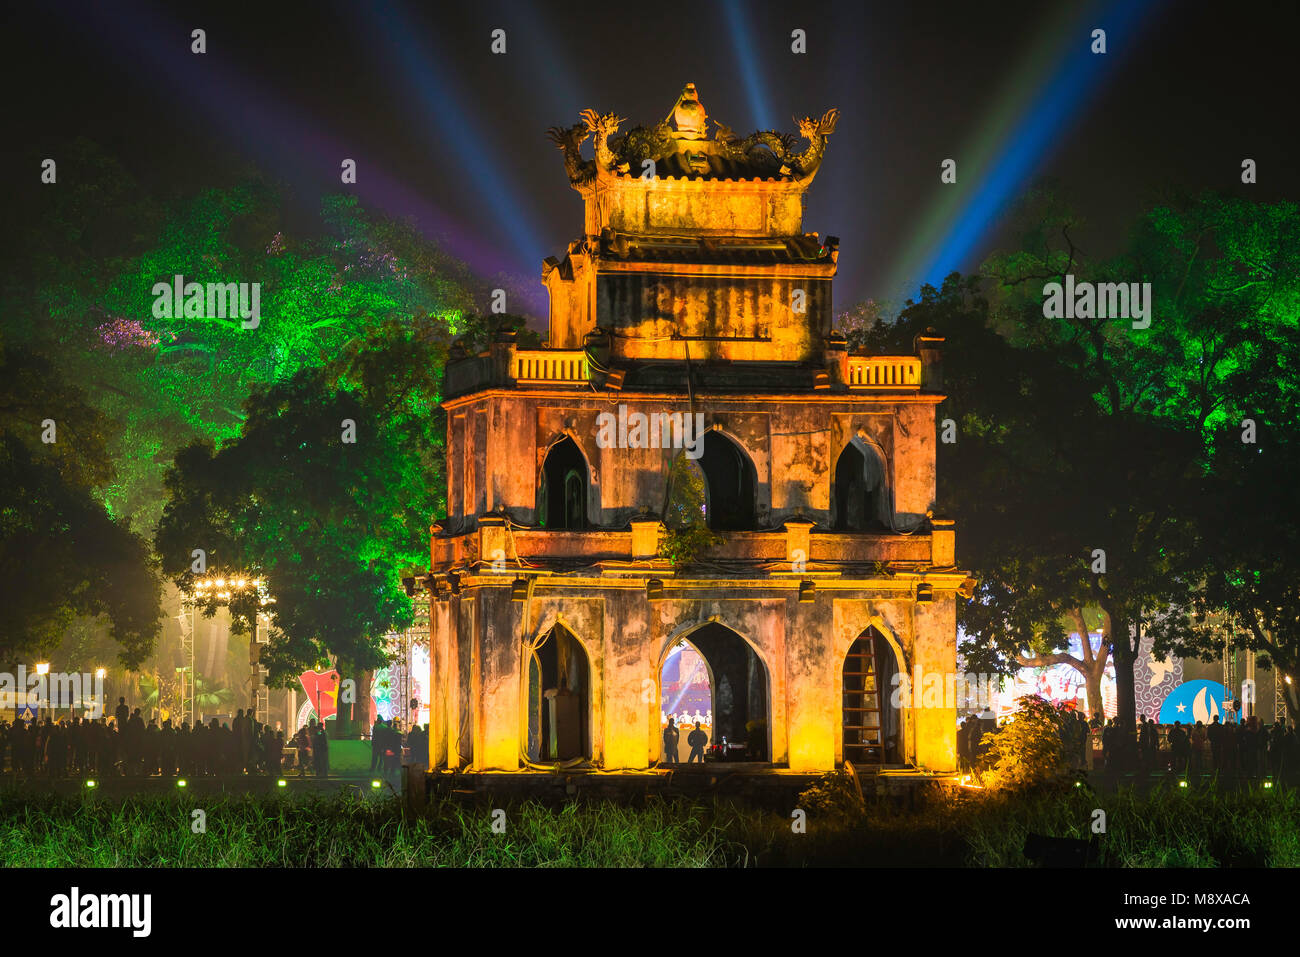 Hanoi Turtle Tower, the old pavilion known as Turtle - or Tortoise - Tower on Hoan Kiem Lake lit by floodlights to celebrate New Year's Eve, Vietnam Stock Photo